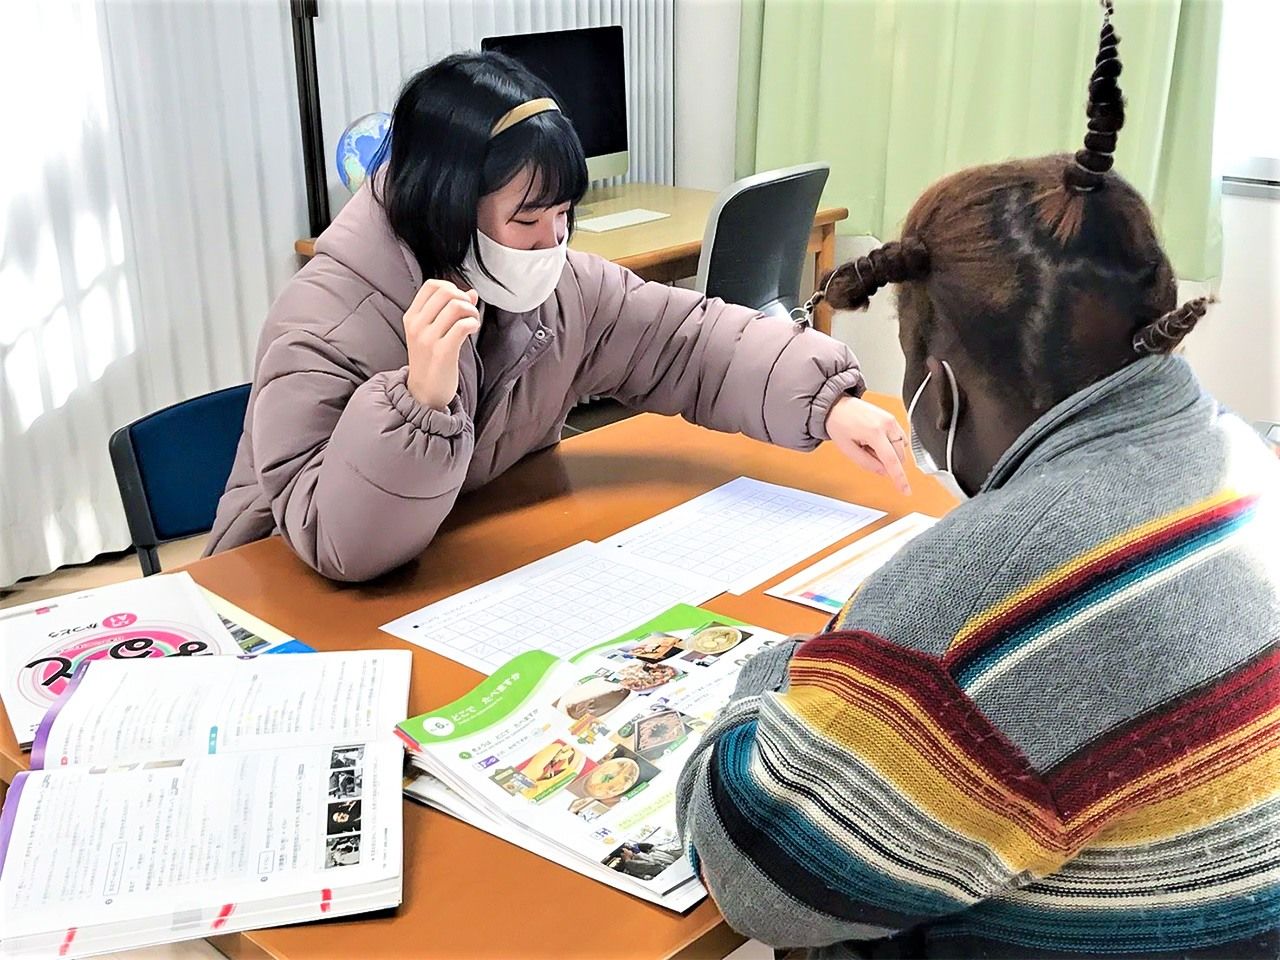 Oikawa on her first day at the refugee center teaches Japanese to a resident from Africa. She was introduced to the shelter by NGO head Urushibara Hiroshi, who helped guide the facility through the difficult funding application process.